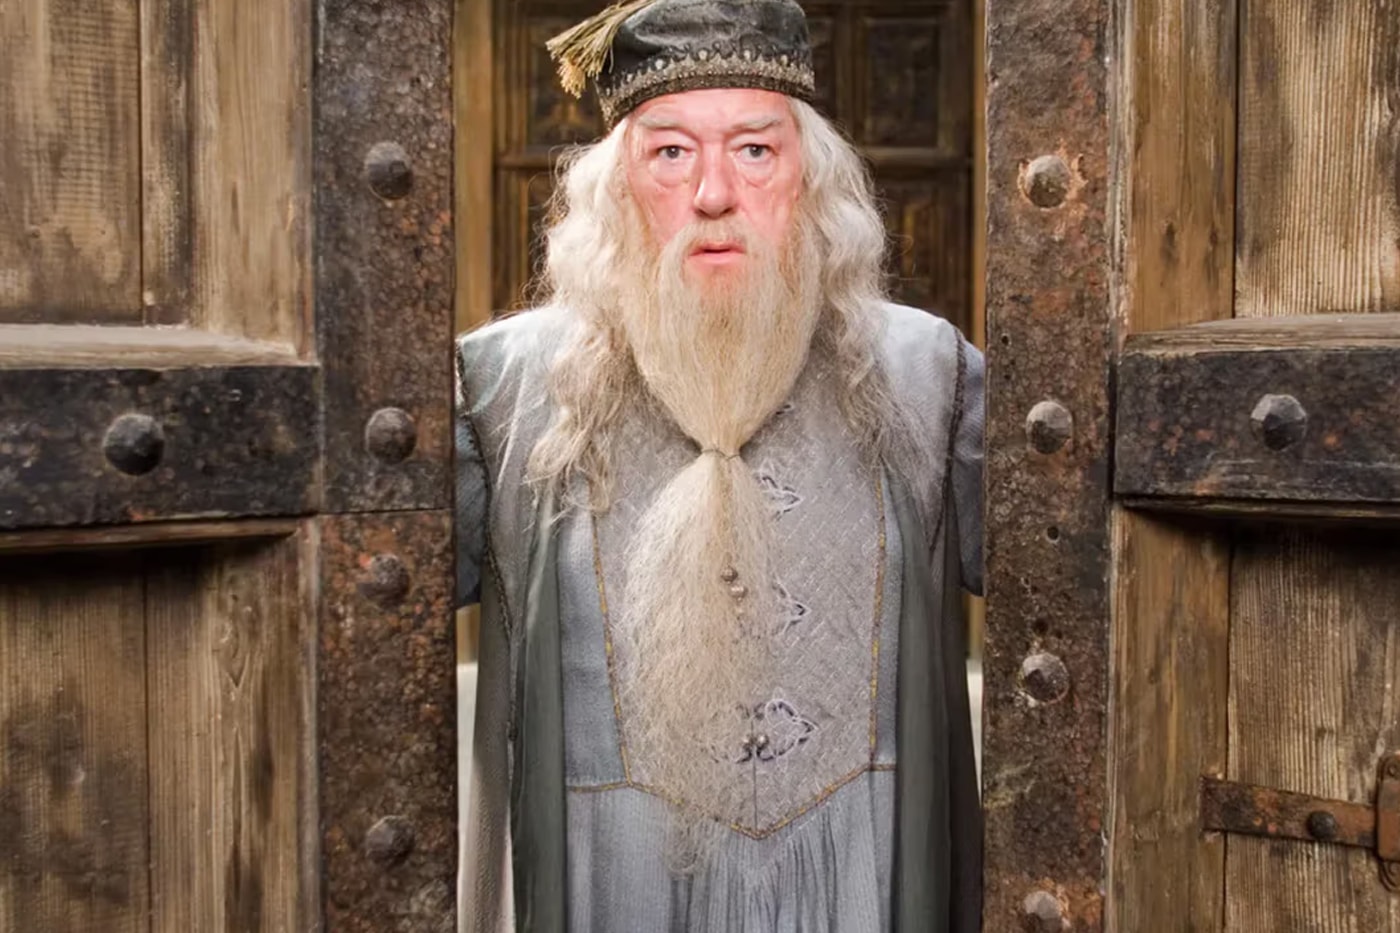 Michael Gambon dumbledore shakespeare harry potter film series franchise actor death cause obituary career acting credits television stage